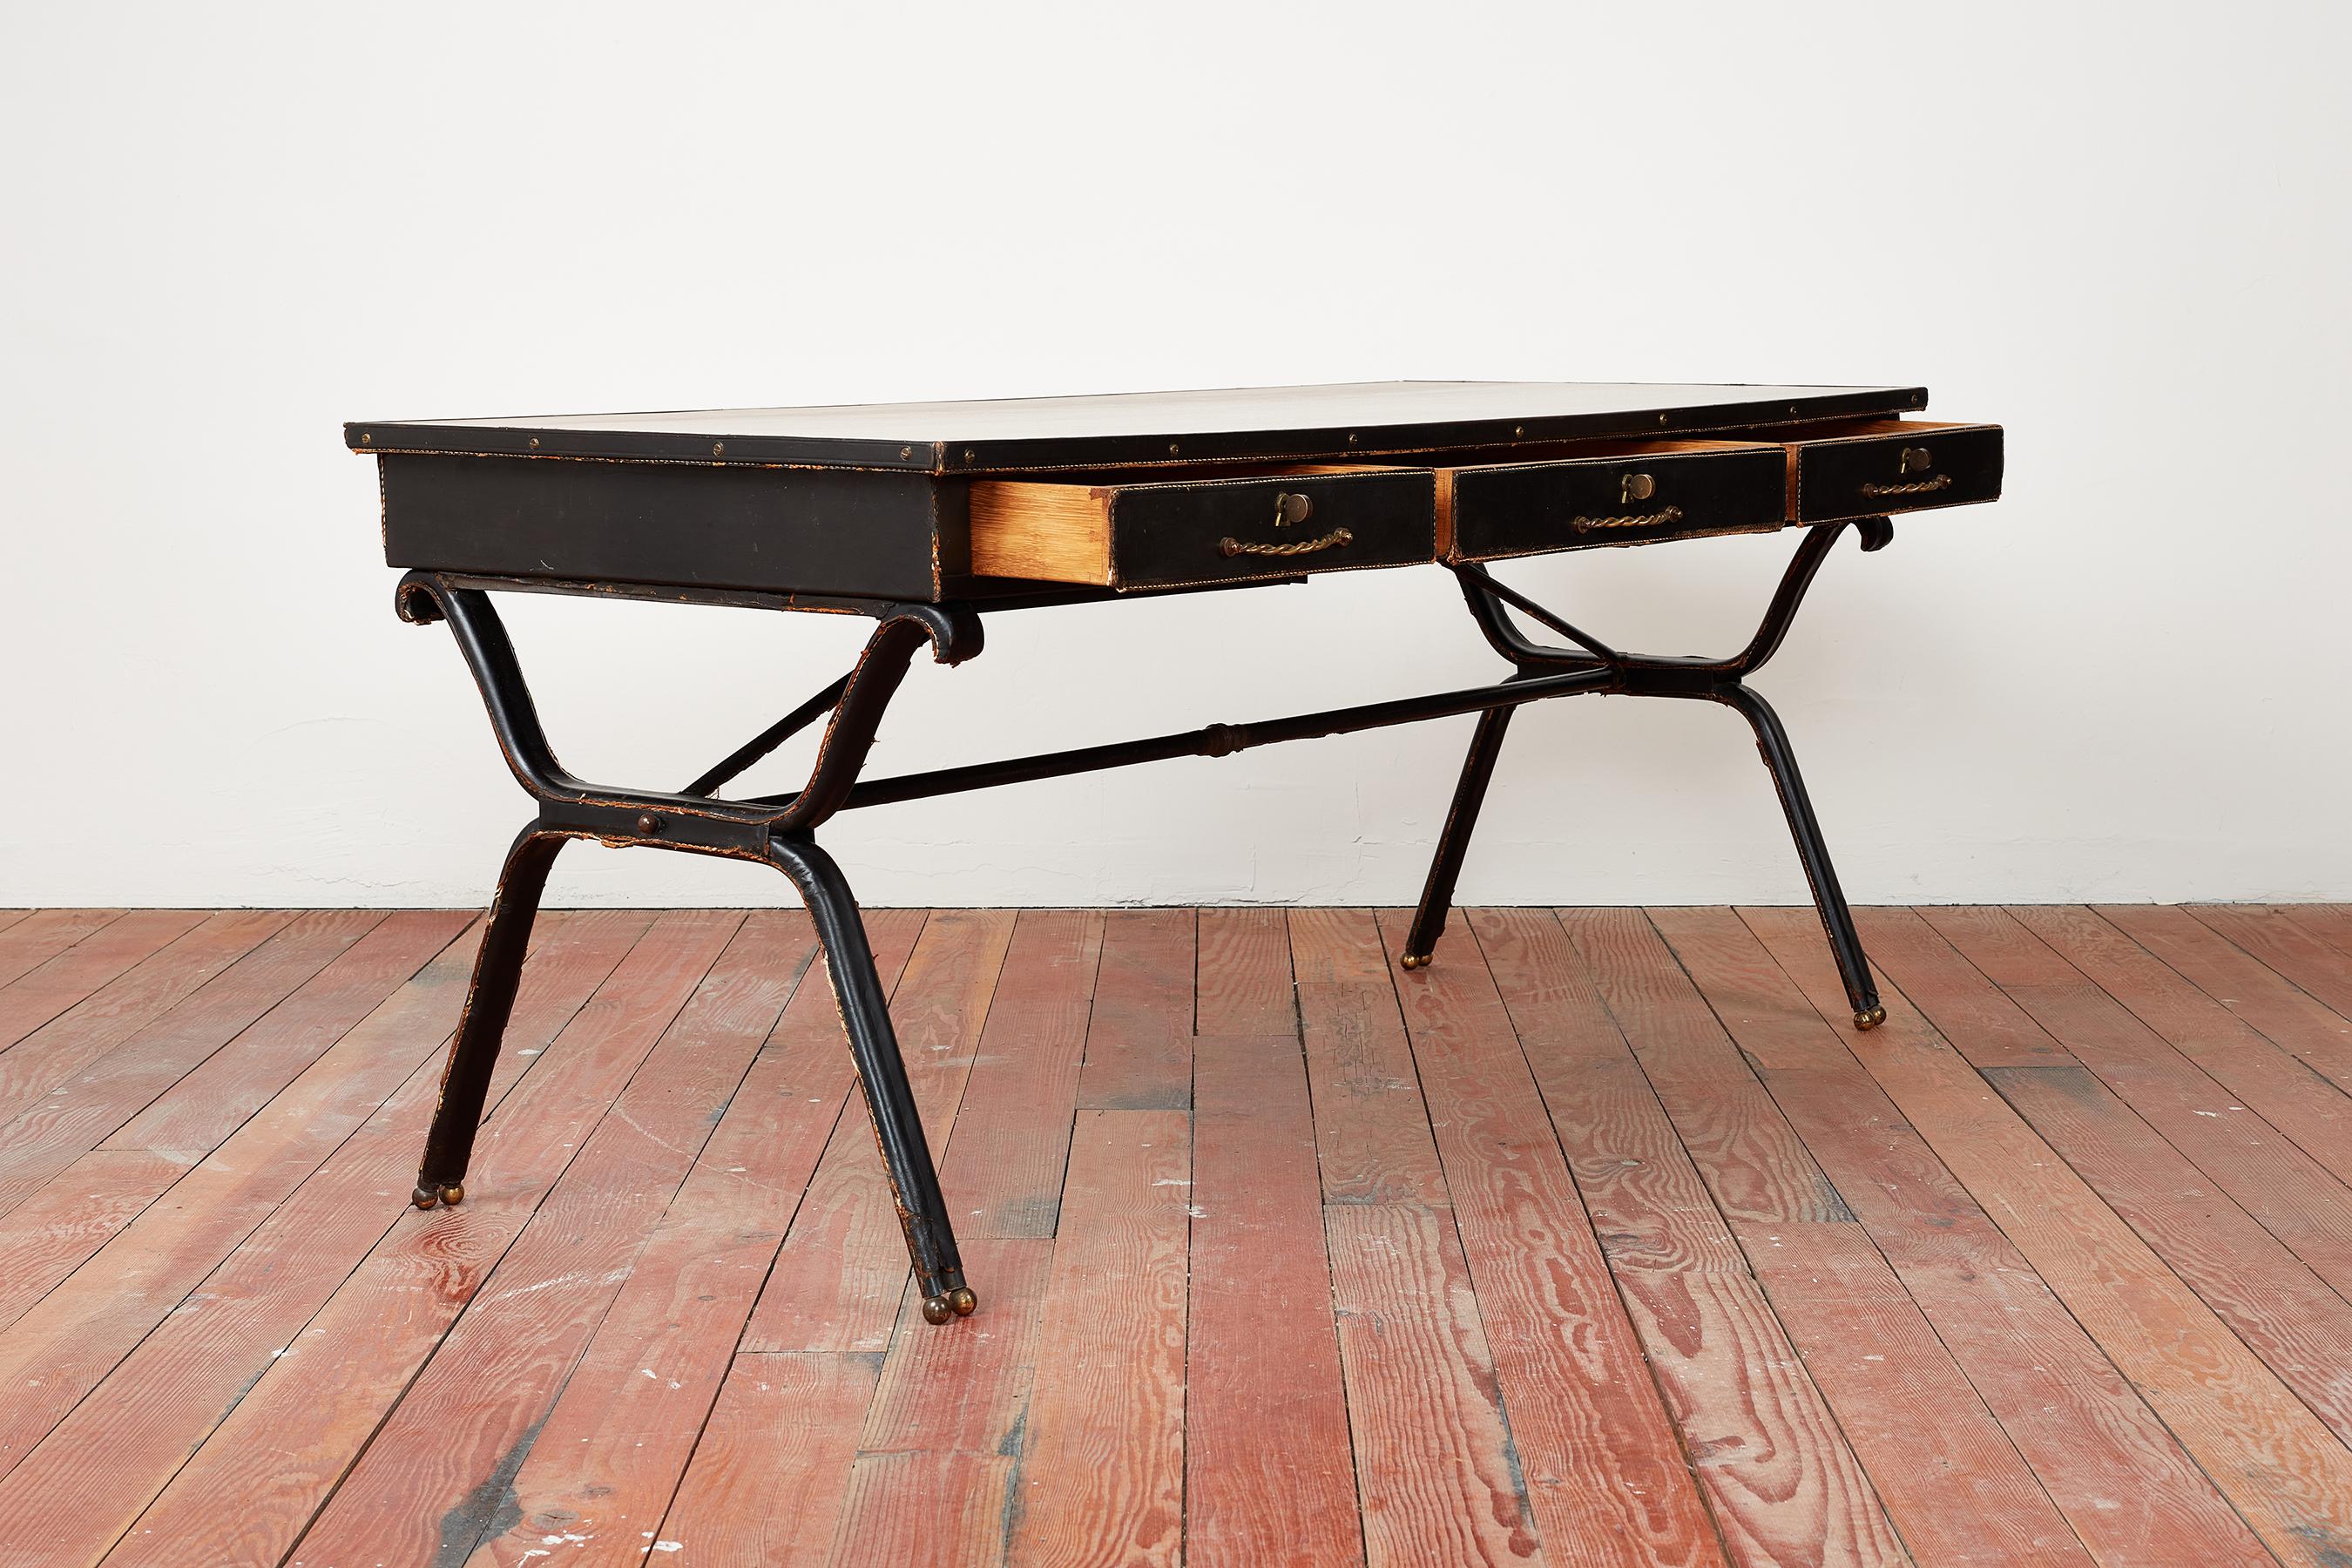 Rare and important desk by Jacques Adnet wrapped in black leather with signature saddle stitching and 3 drawers. 
Curved legs wrapped in leather with brass sphere feet. 
Newly veneered mahogany wood top
Bronze cord grip handles
Vintage condition